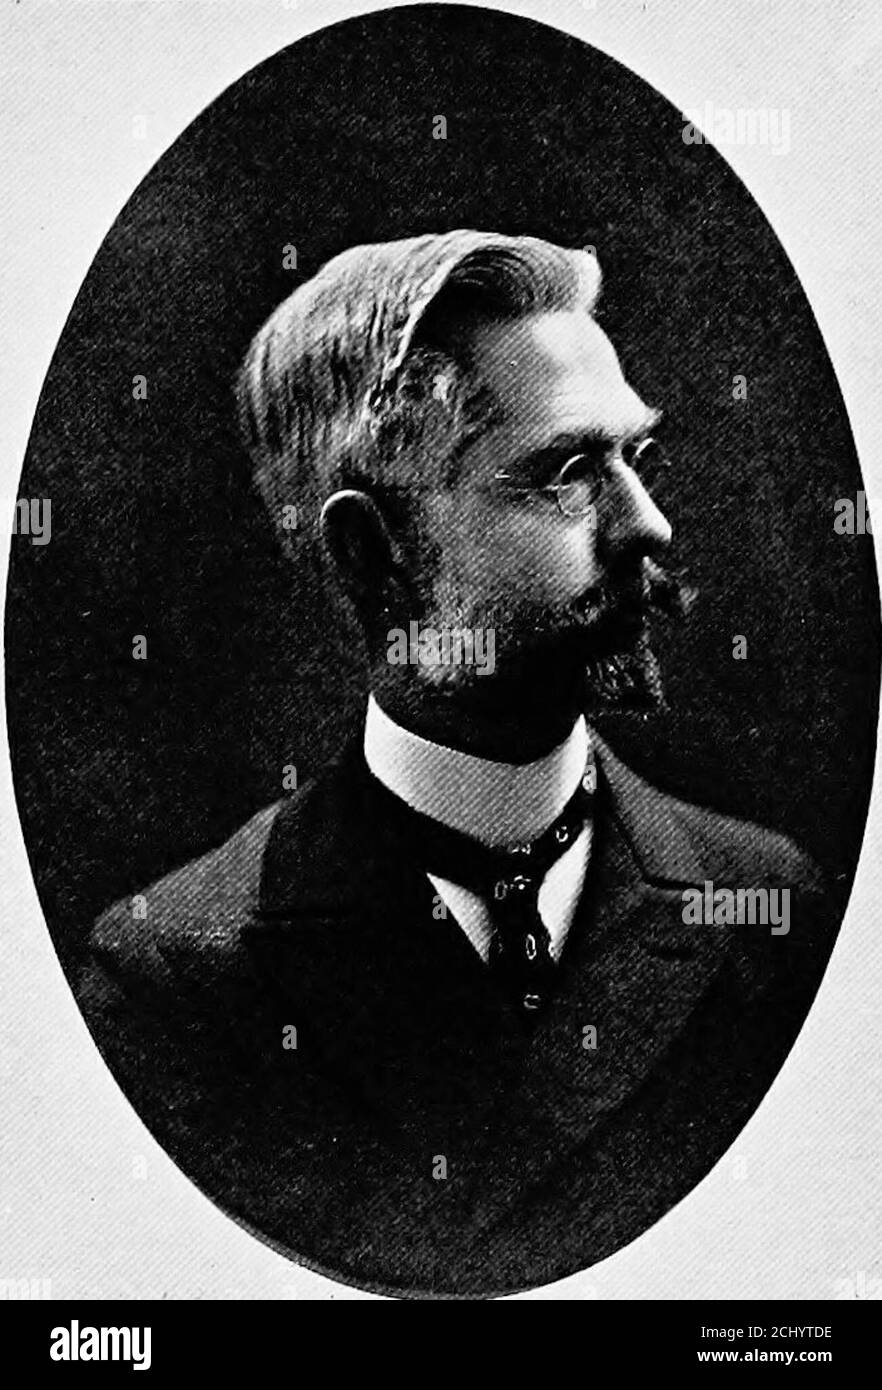 . History of the University of Michigan . GEORGE VVASHINGlON PAIIERSI )N many years. On July 2, 1890, he was married toMerib Susan Rowley (A.B. 1890), of Adrian, Michi- FREDERICK CHARLES NEWCOMBE was born at Flint, Michigan, May 11, 1858, sonof Thomas and Eliza (Gayton) Newcombe. Hisparents came to this country from England in 1849,. FREDERICK CHARLES NEWCOMBE both being descended from landholders and farmersof Devonshire. His early education was obtainedin the public schools of Flint. From 18S0 to 18S7he taught in the Michigan School for the Deaf atFlint. In 1SS7 he entered the University of Stock Photo